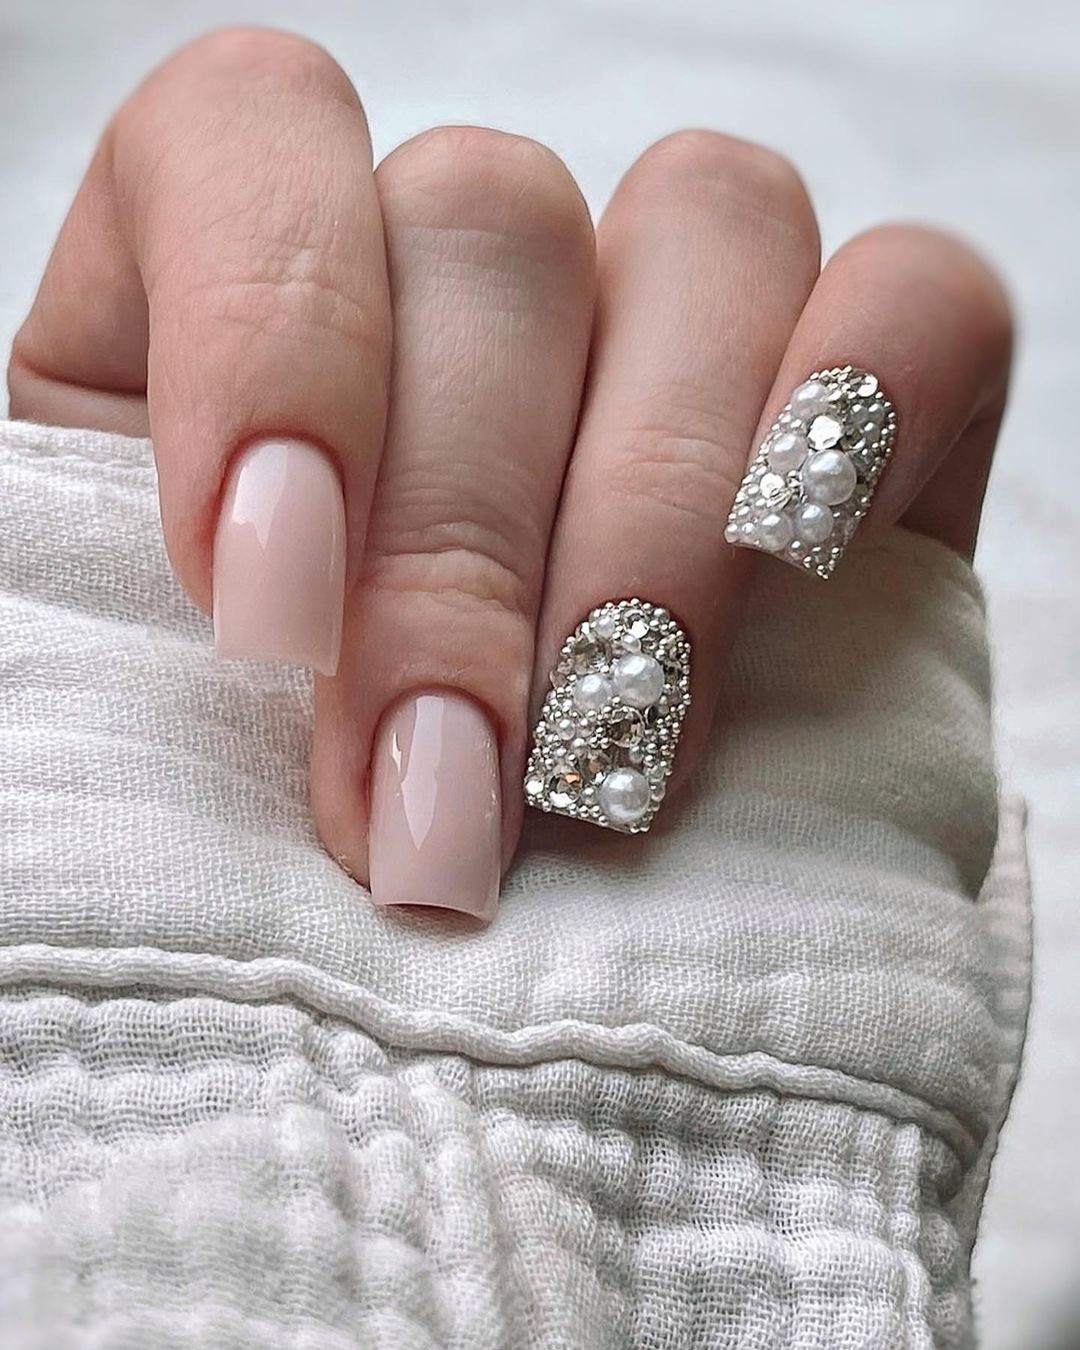 Short Square Nude Nails with Pearls